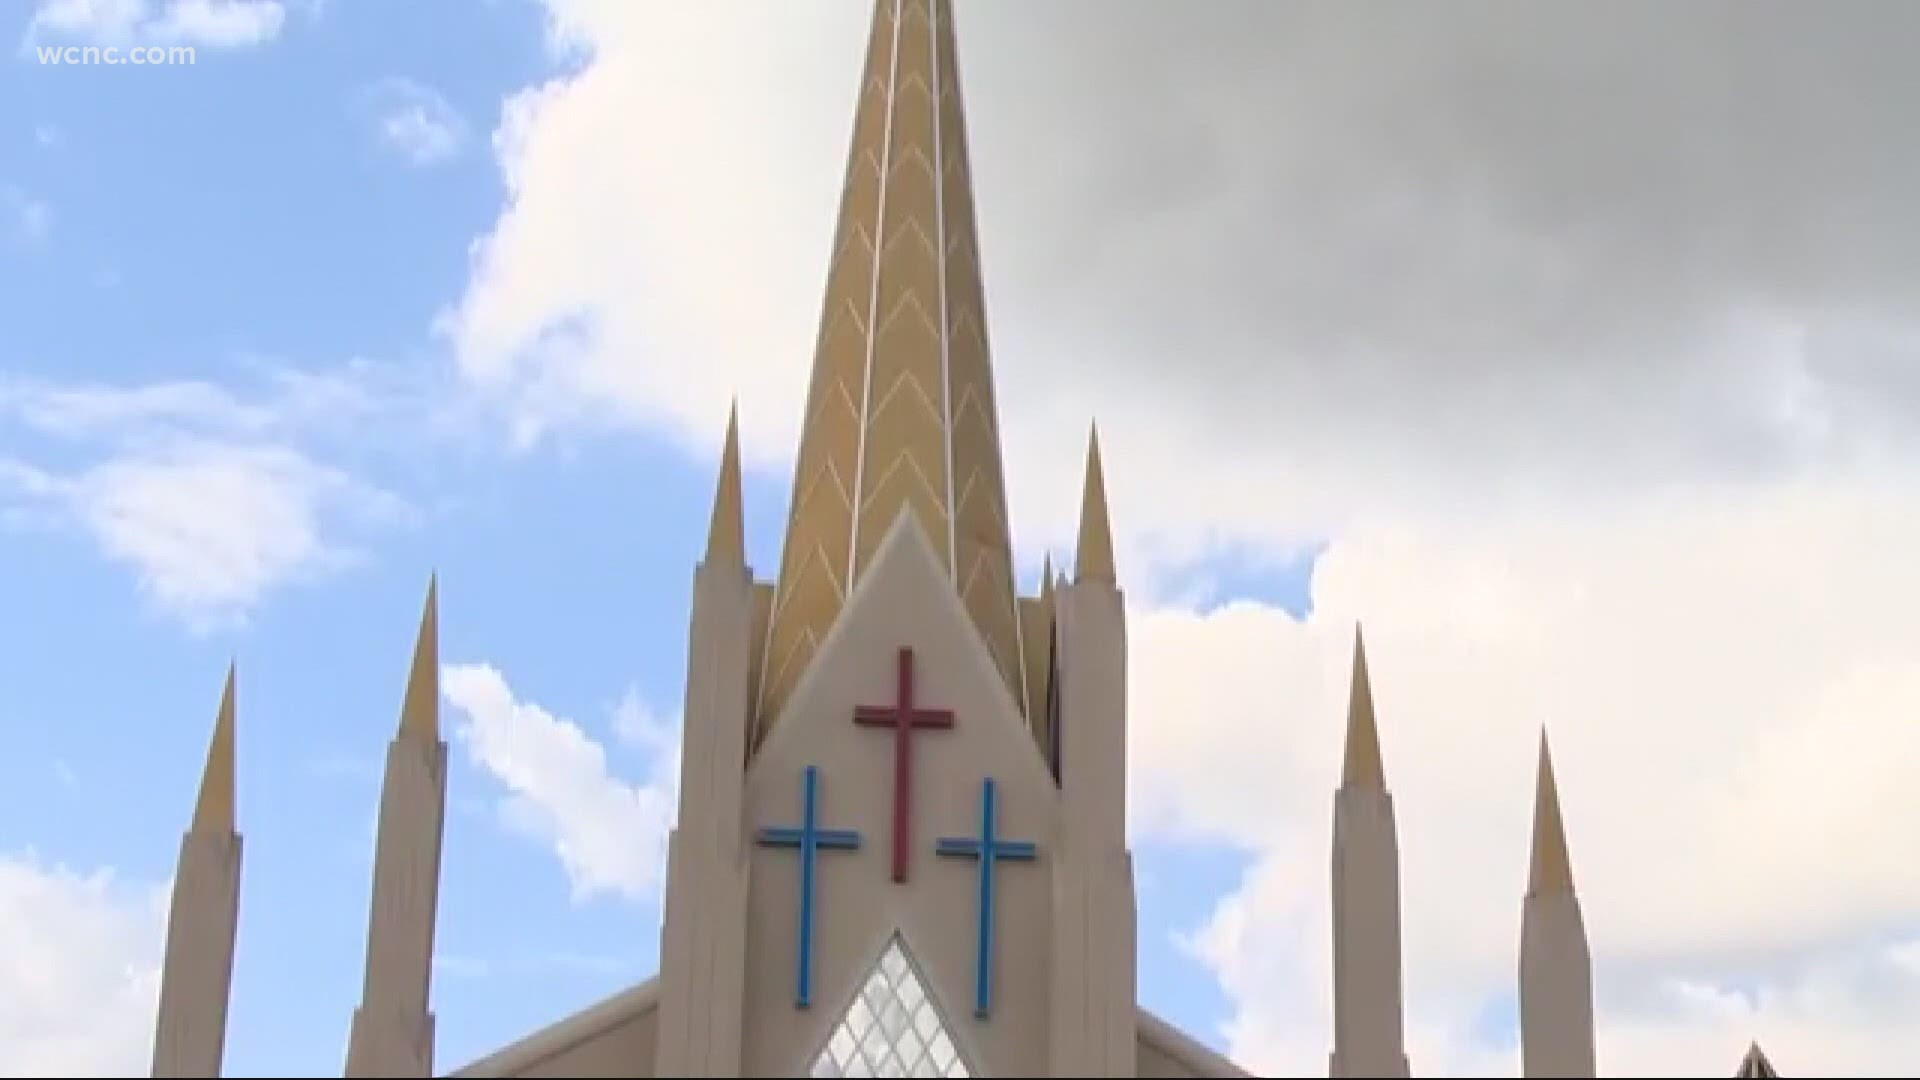 As state health officials warn against large gatherings, WCNC Charlotte has learned a local church is hosting a gathering that’s expected to bring out hundreds.